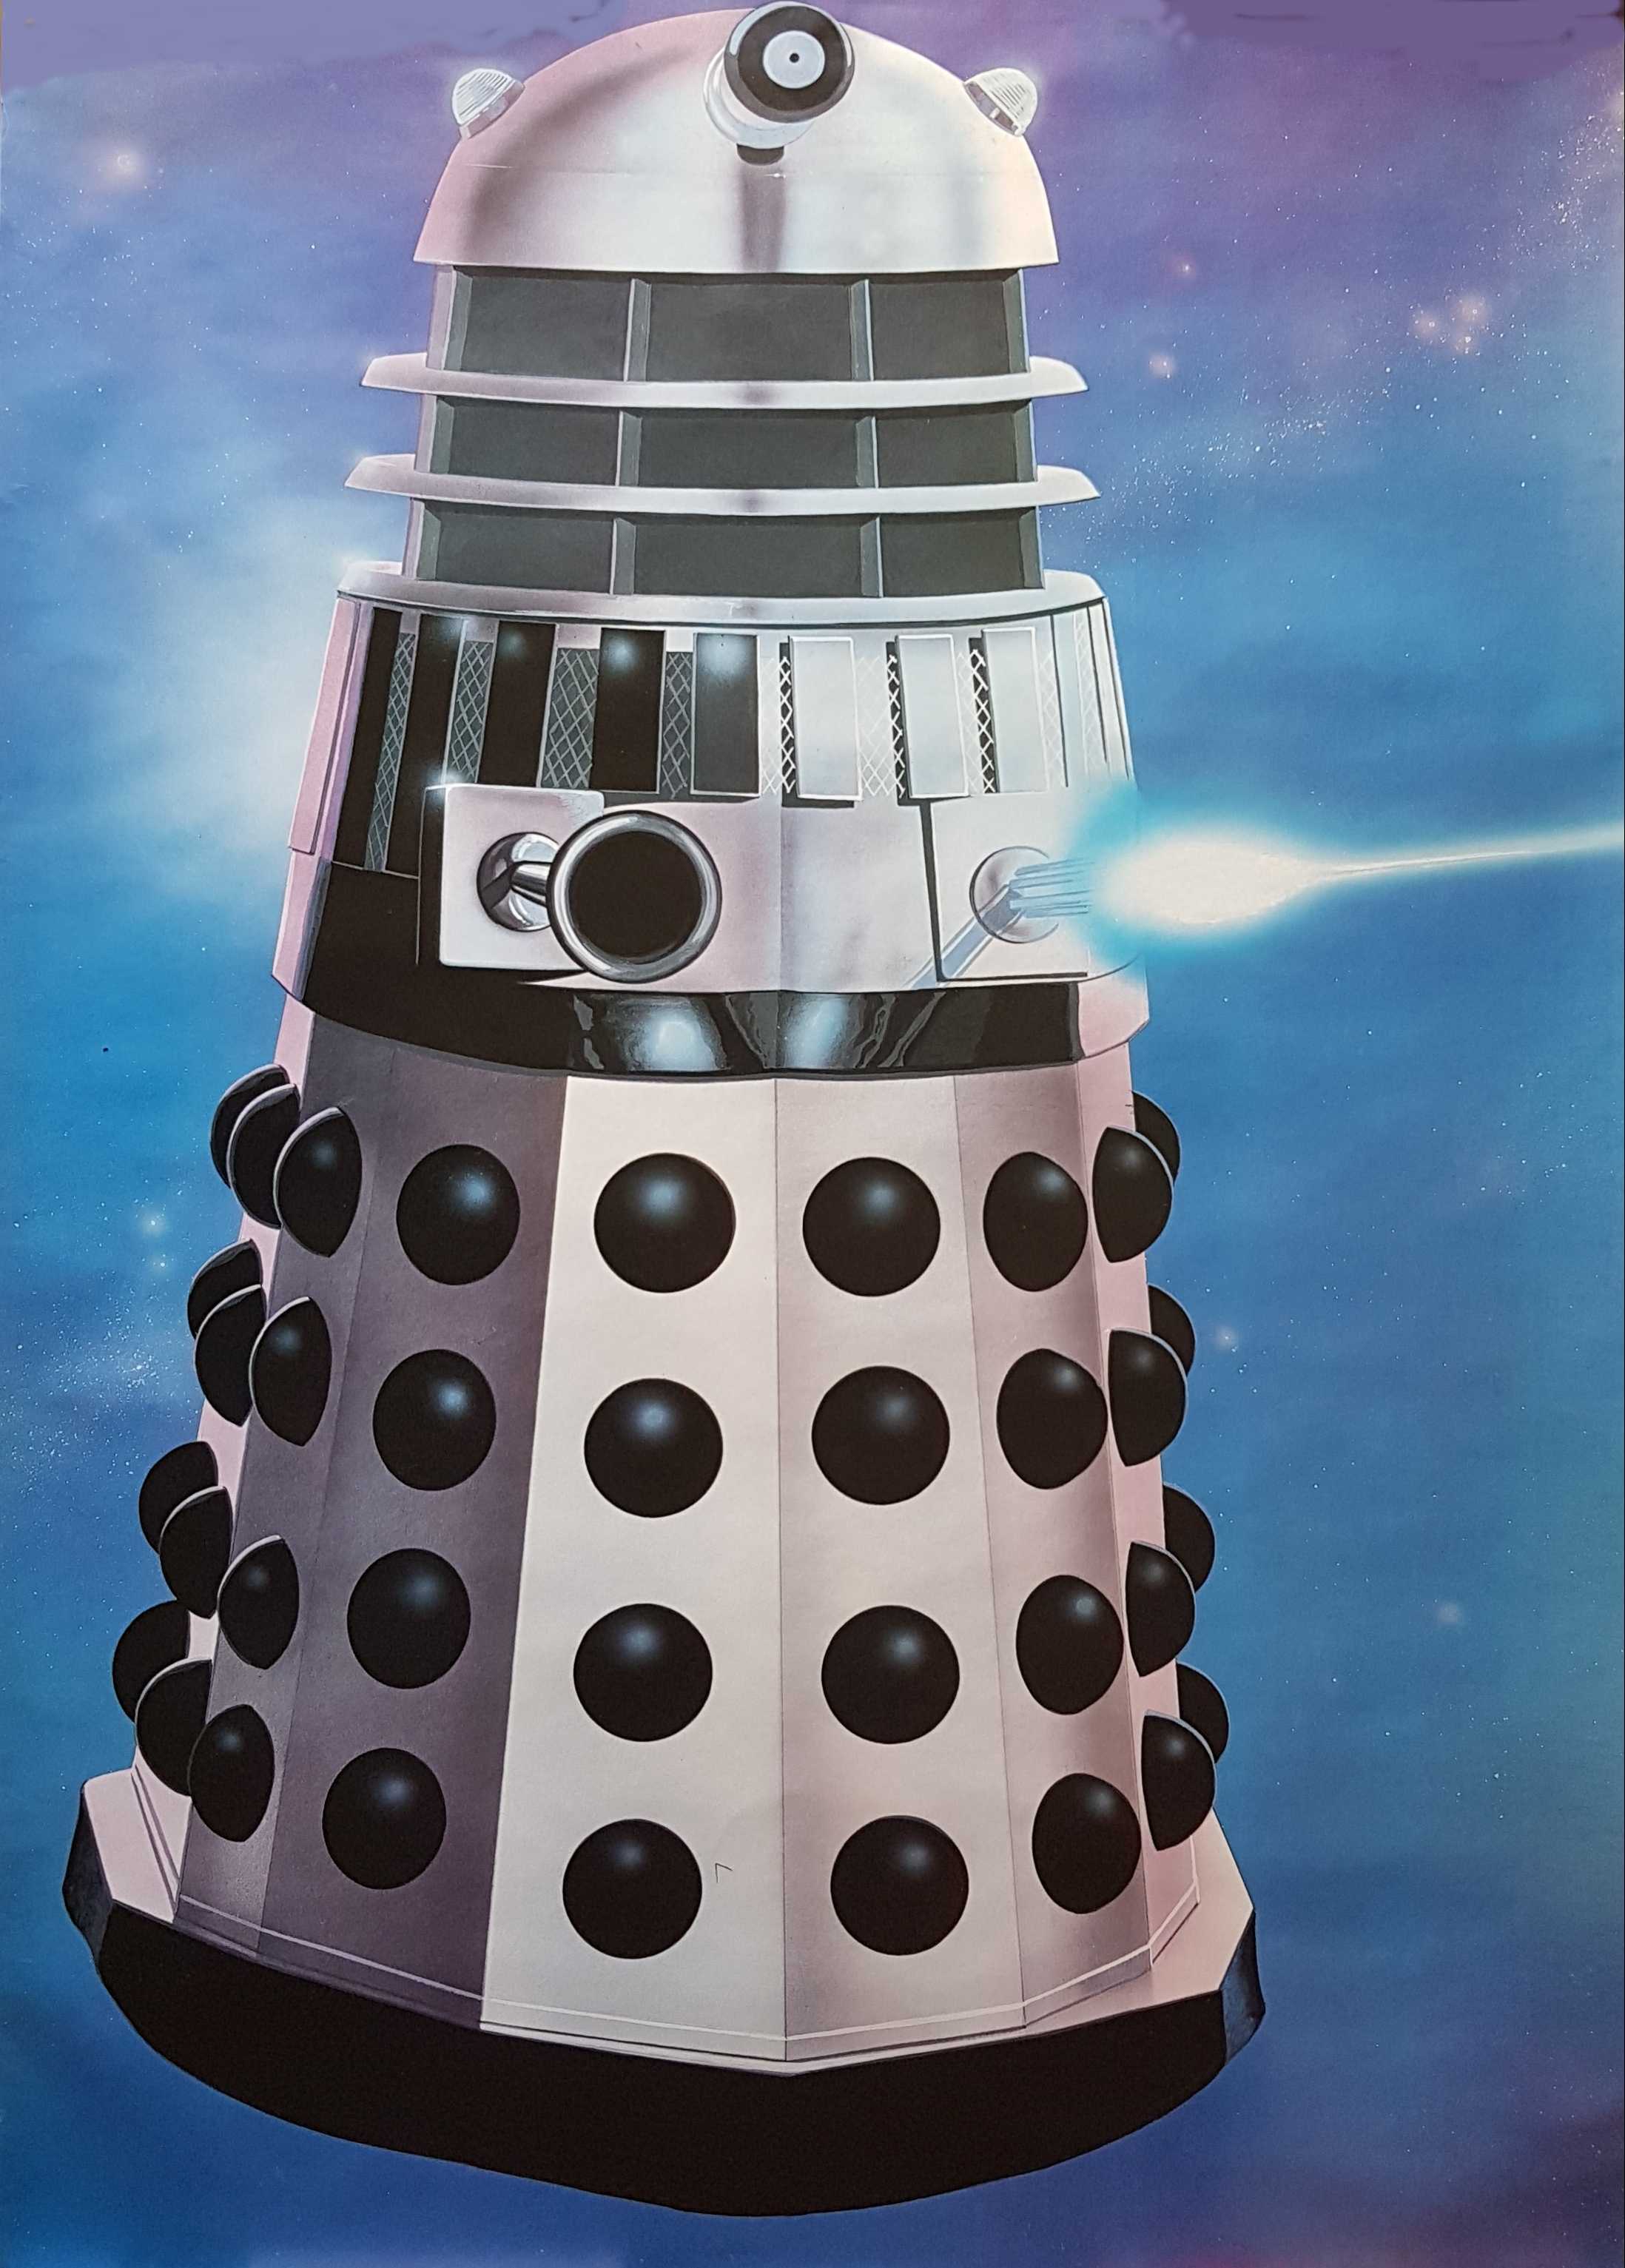 Picture of Poster-DW-Dalek Doctor Who - Dalek by artist Unknown from the BBC records and Tapes library